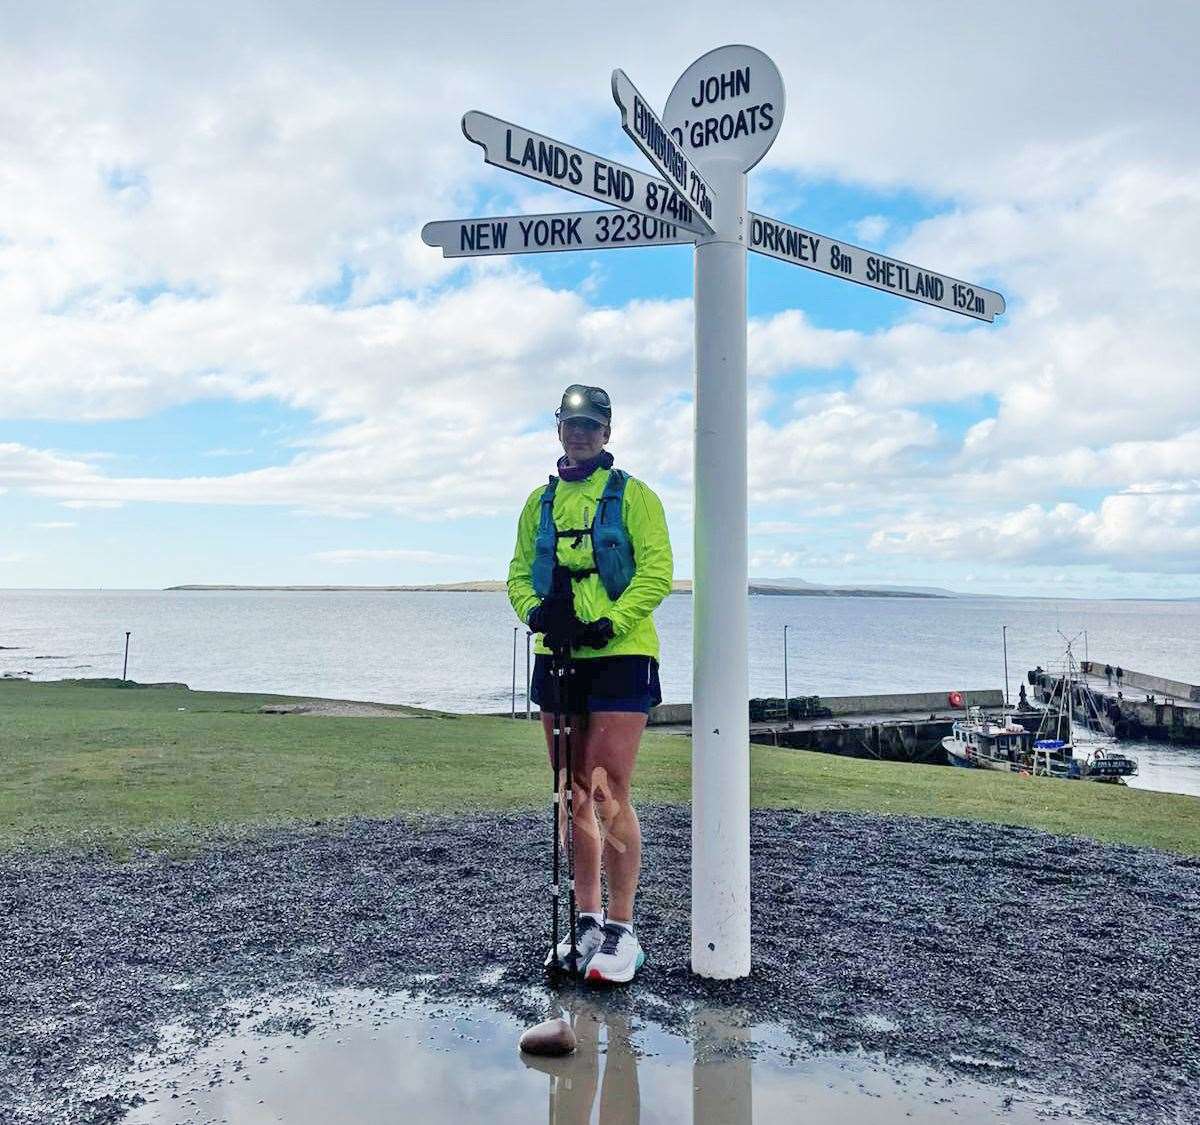 Sara Crosland at the John O'Groats signpost after completing her journey at around 5pm on Tuesday.